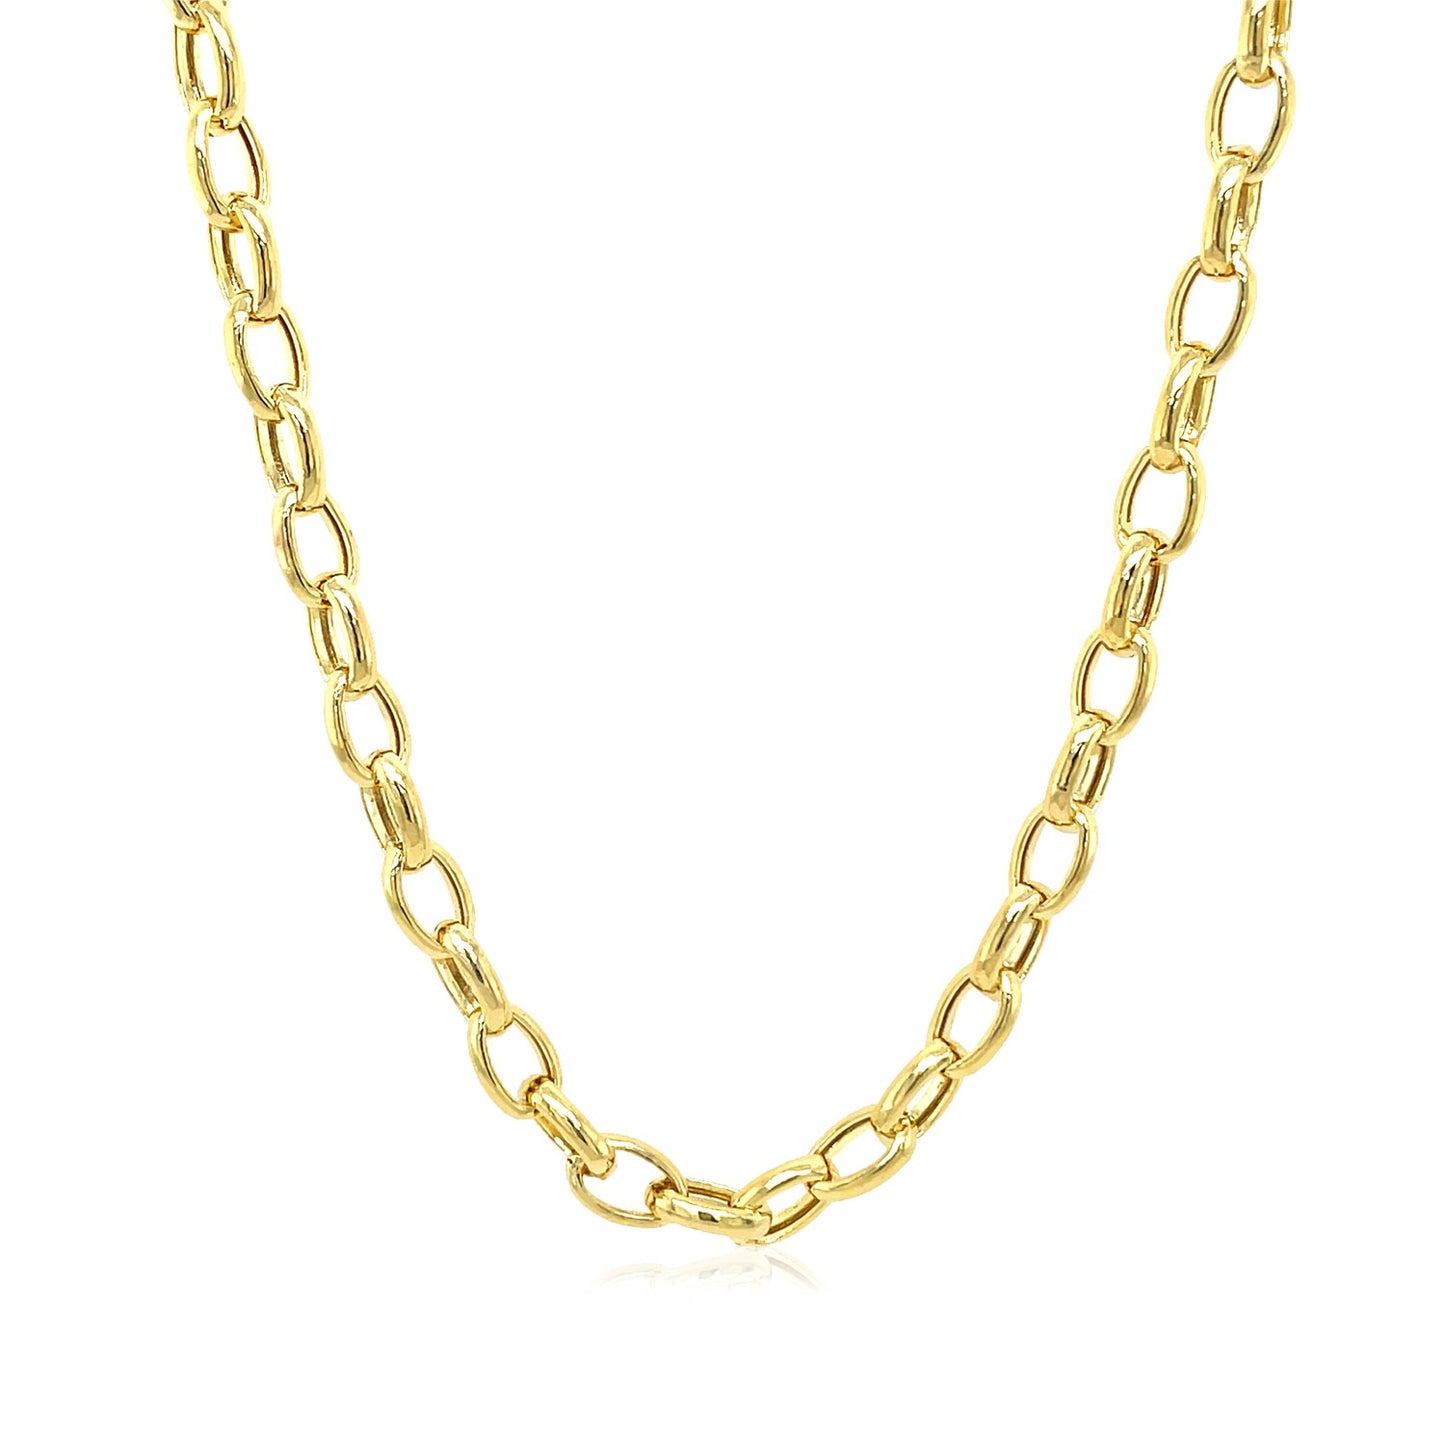 4.6mm 14k Yellow Gold Oval Rolo Chain